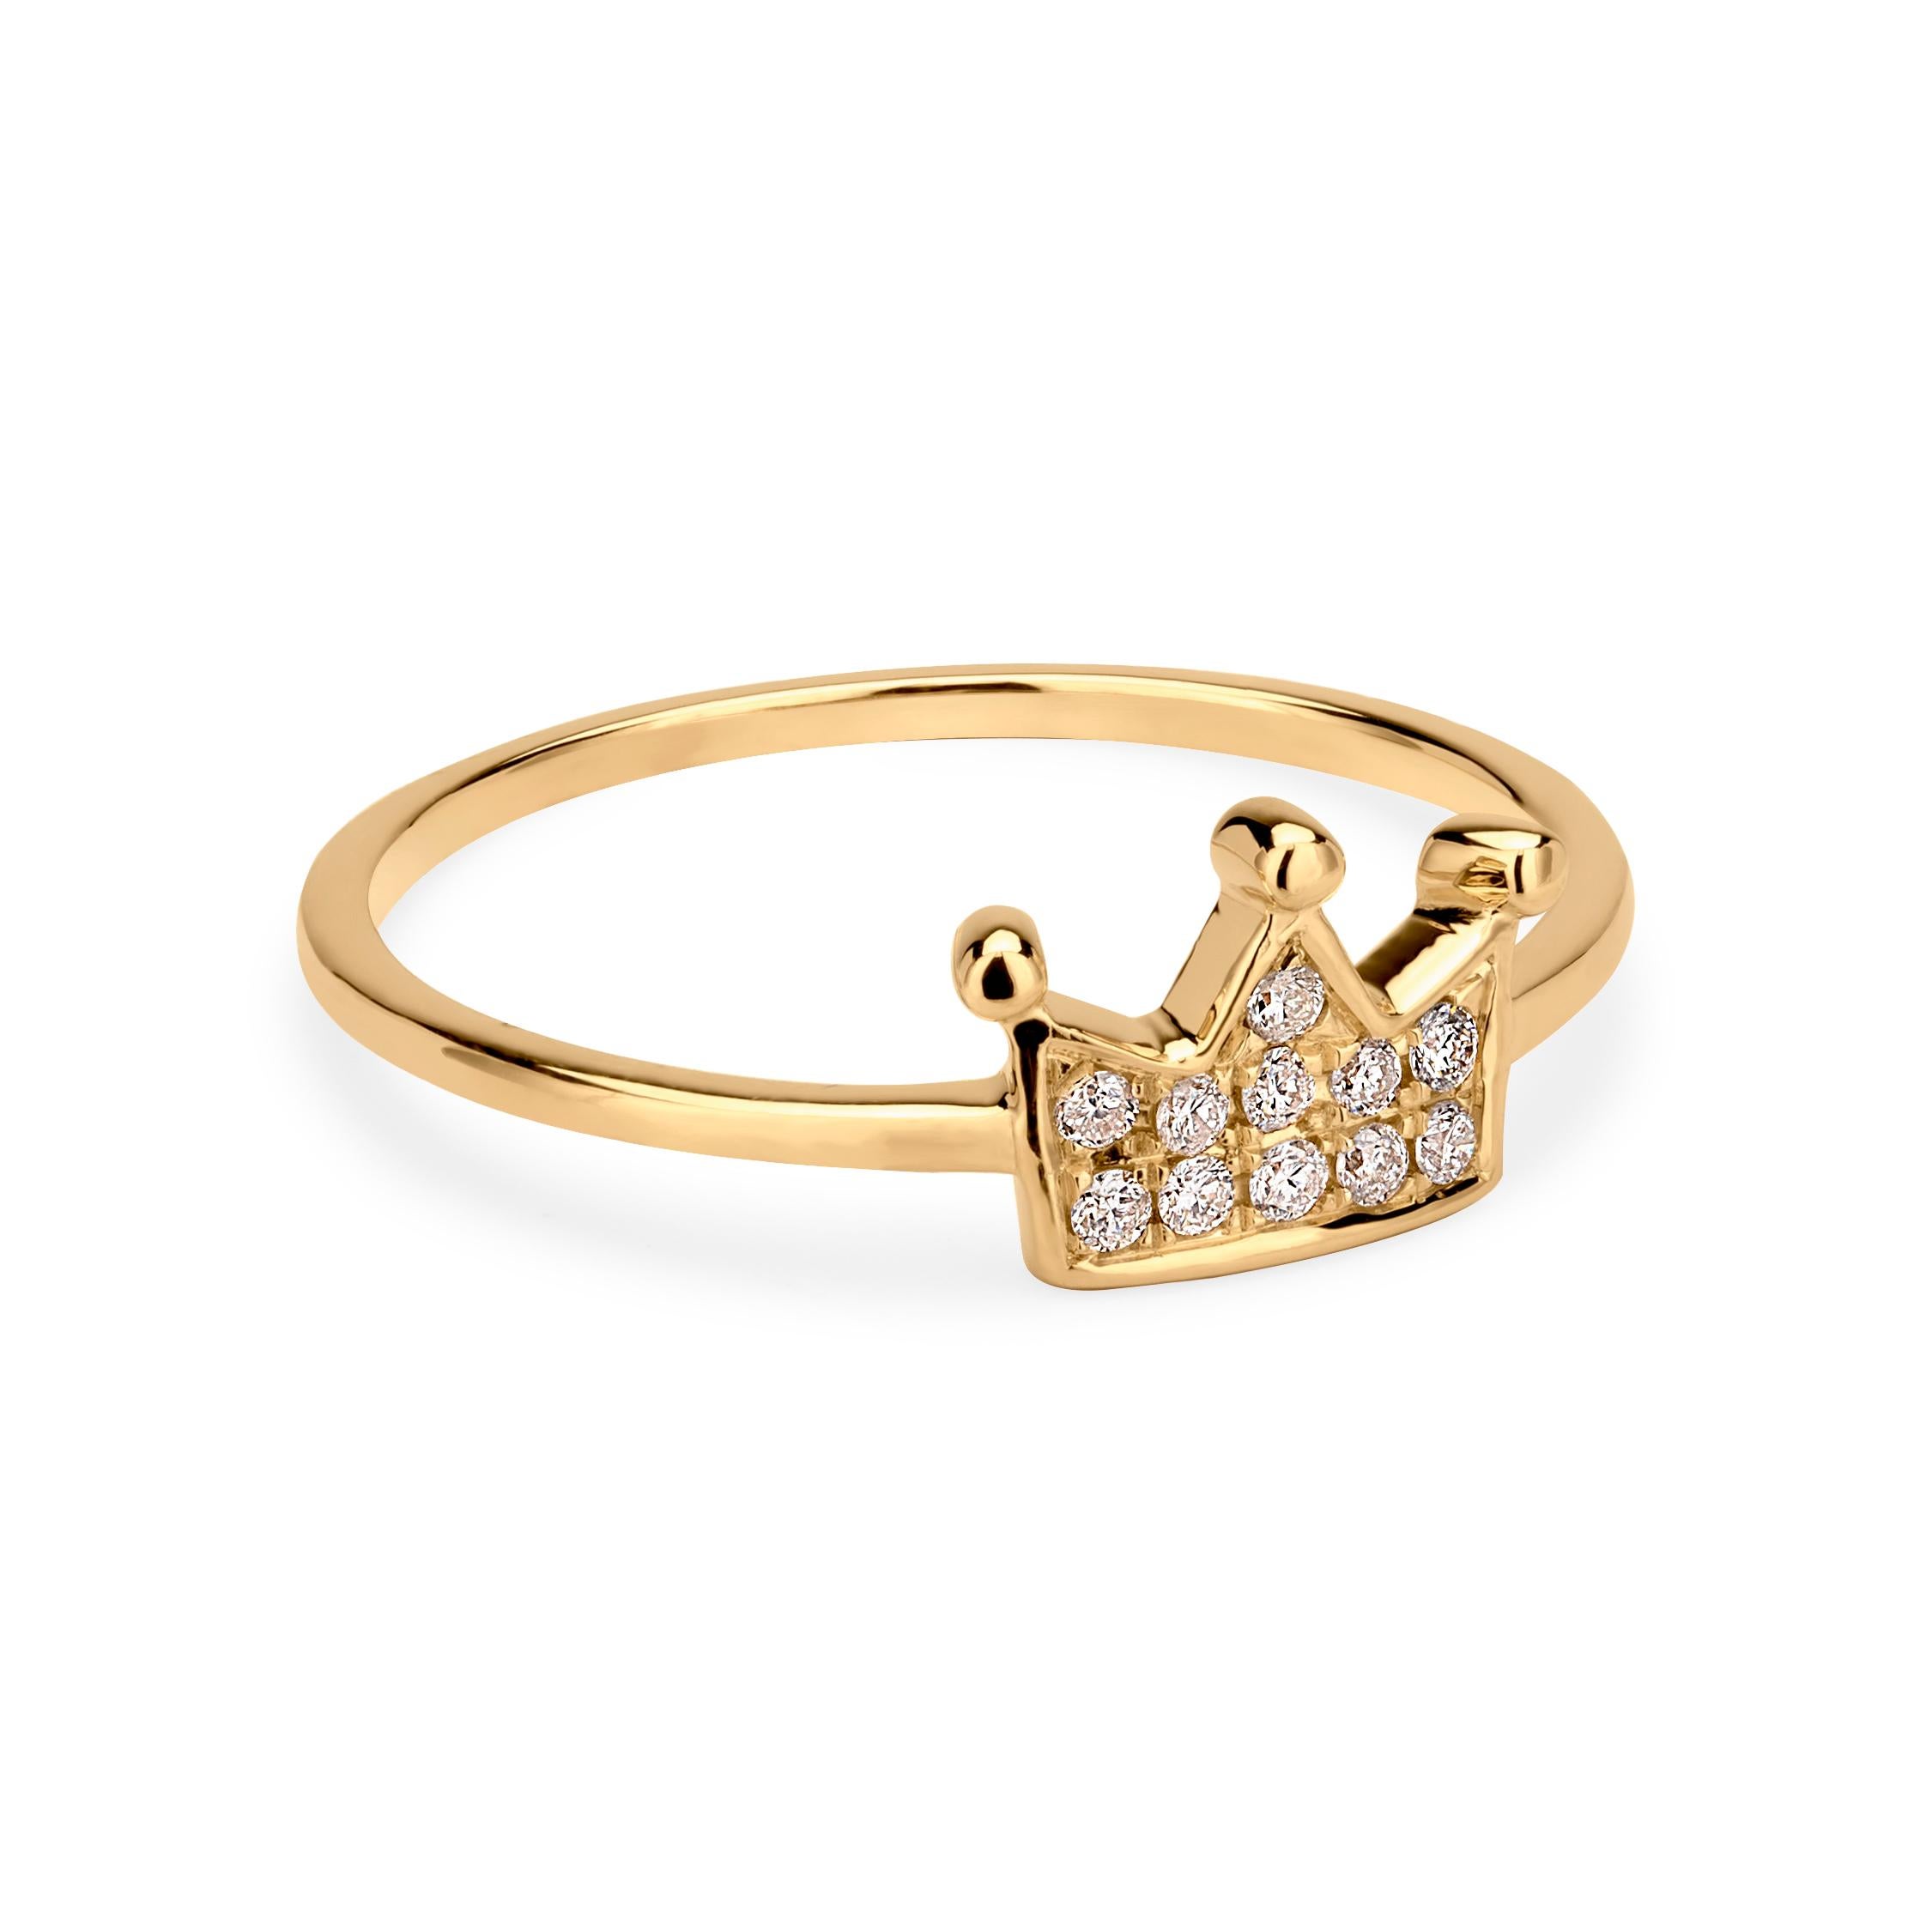 Grace your finger with a Luxle crown ring a symbol of glory, power, immortality, sovereignty, and royalty. Subtle yet pretty this crown ring is the new fashion statement. This ring is featured with 11 round cut diamonds, totaling 0.09Cts embellished